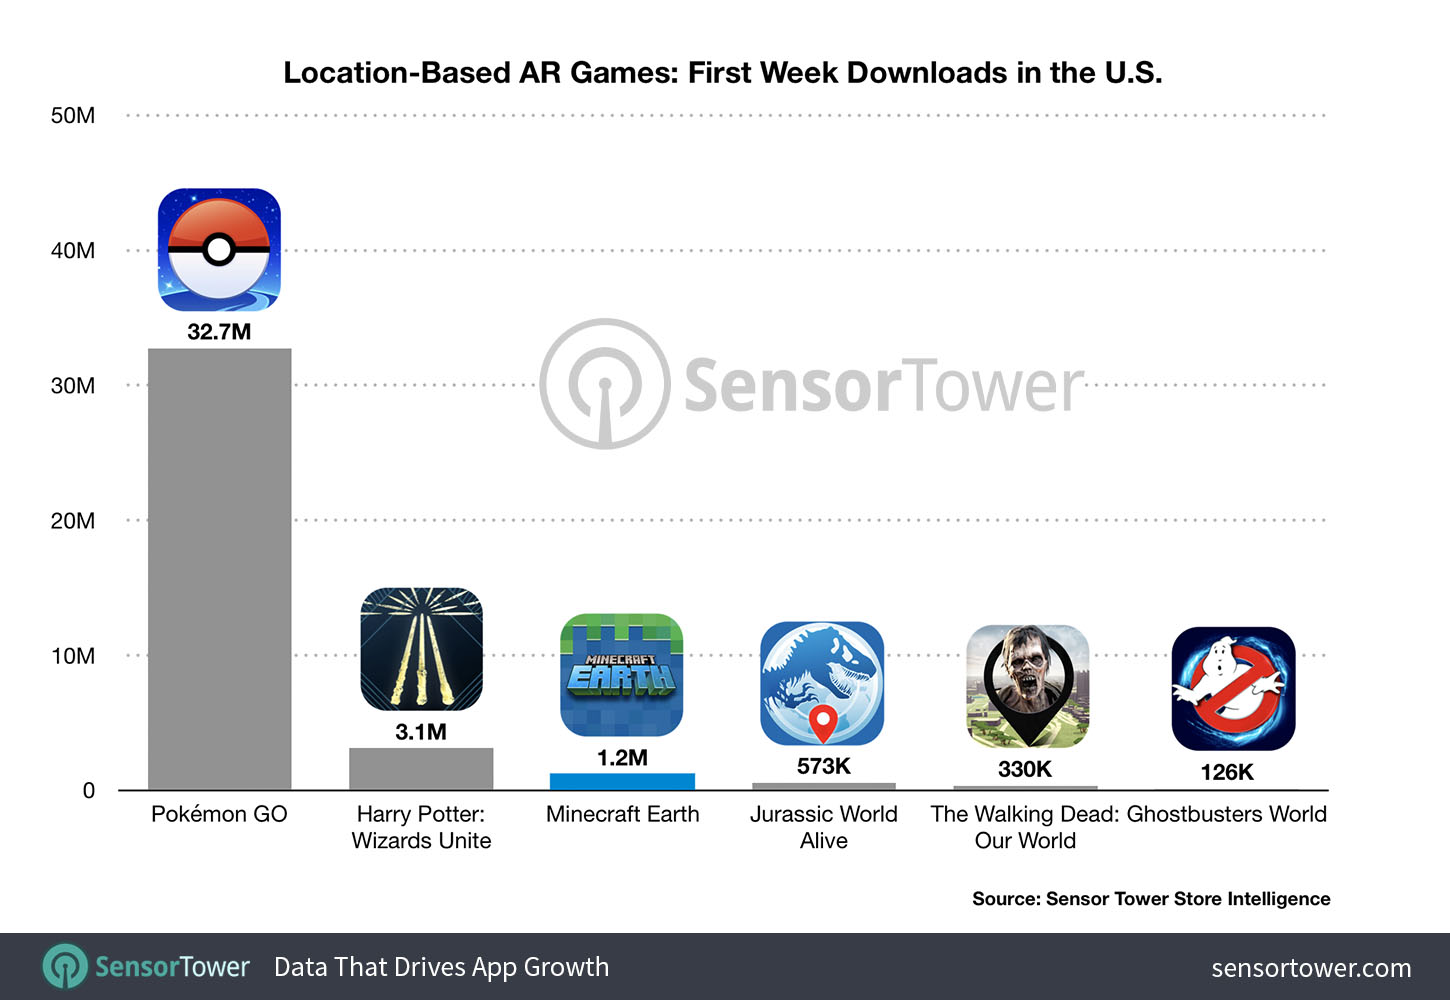 Location-Based AR Games First Week Downloads